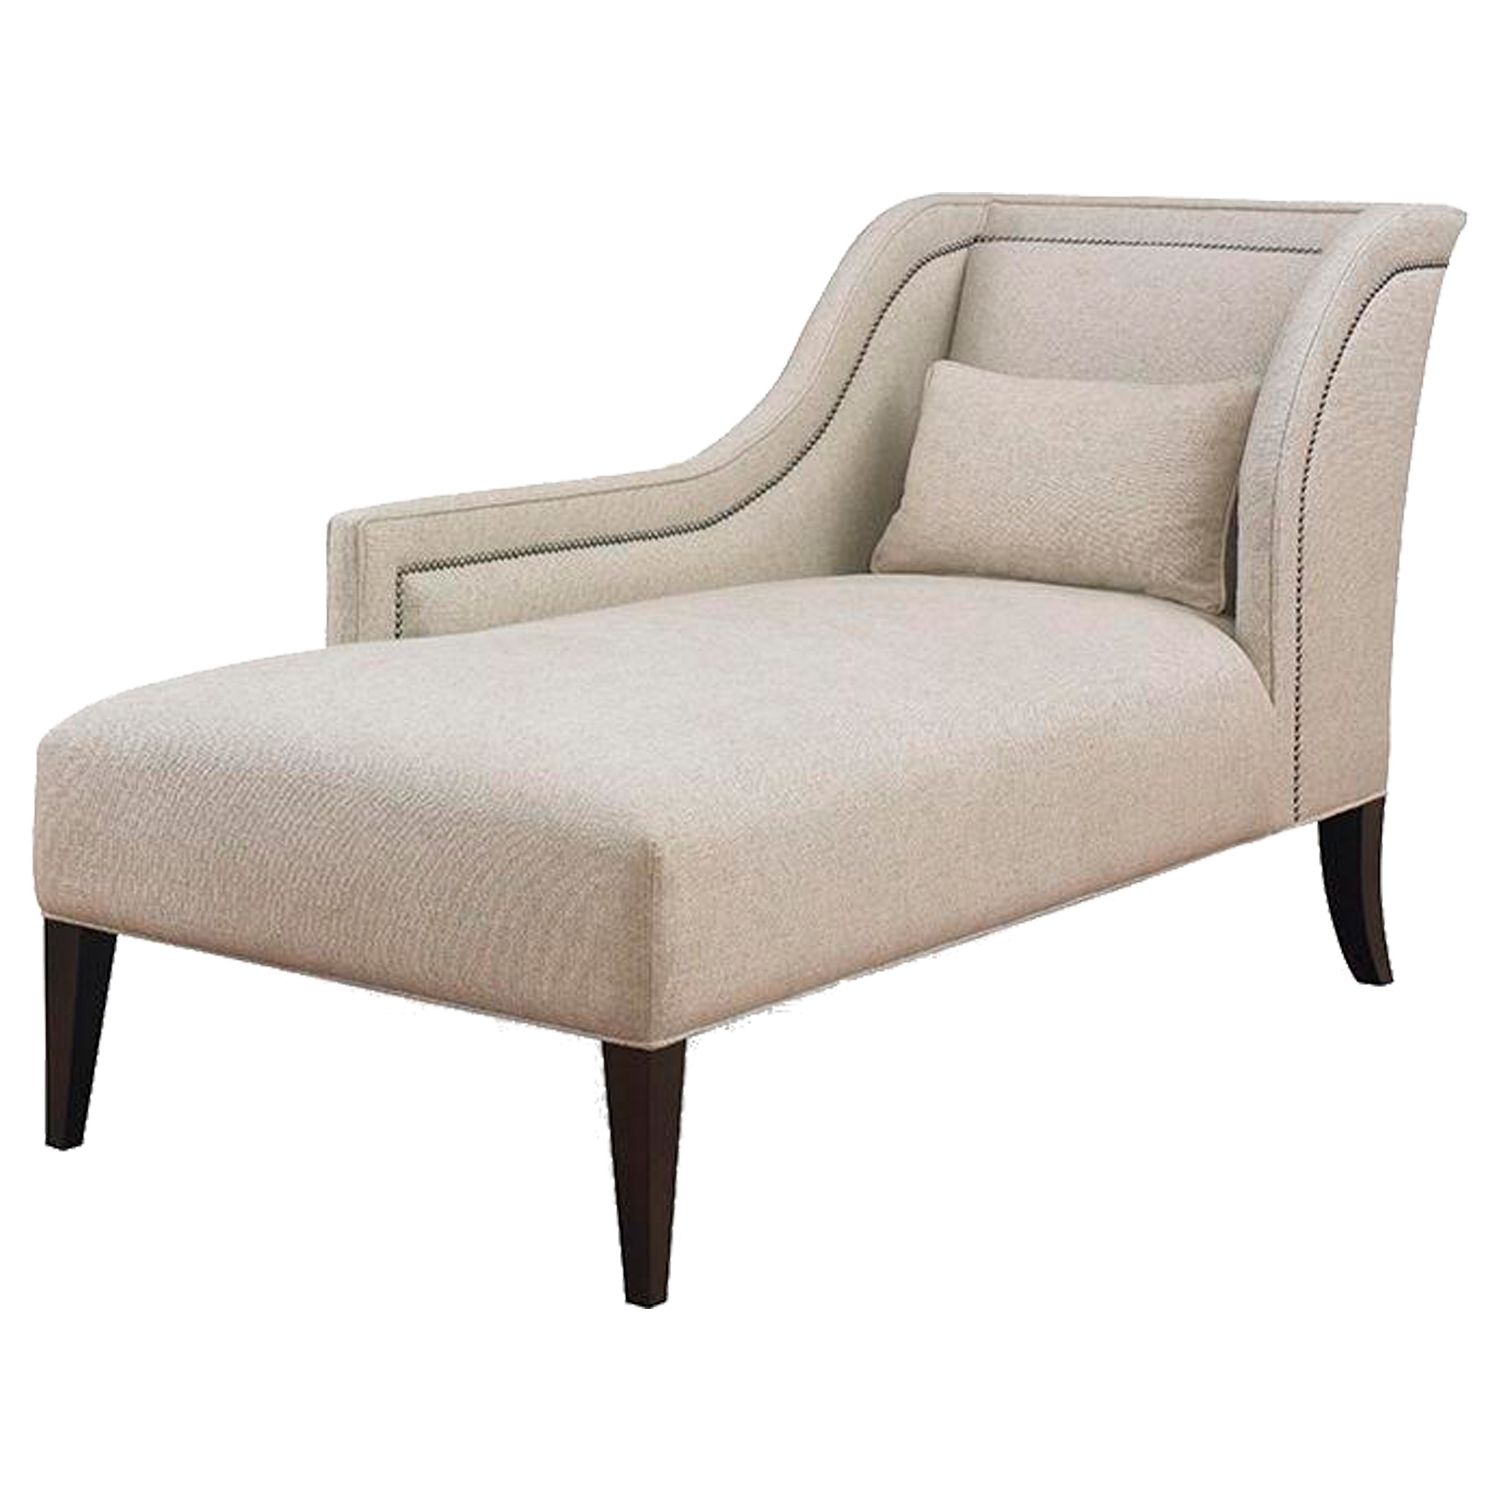 2018 Buy Pasadena One Arm Chaisekravet – Made To Order Designer In Chaise Lounge Chairs With Arms (Photo 12 of 15)